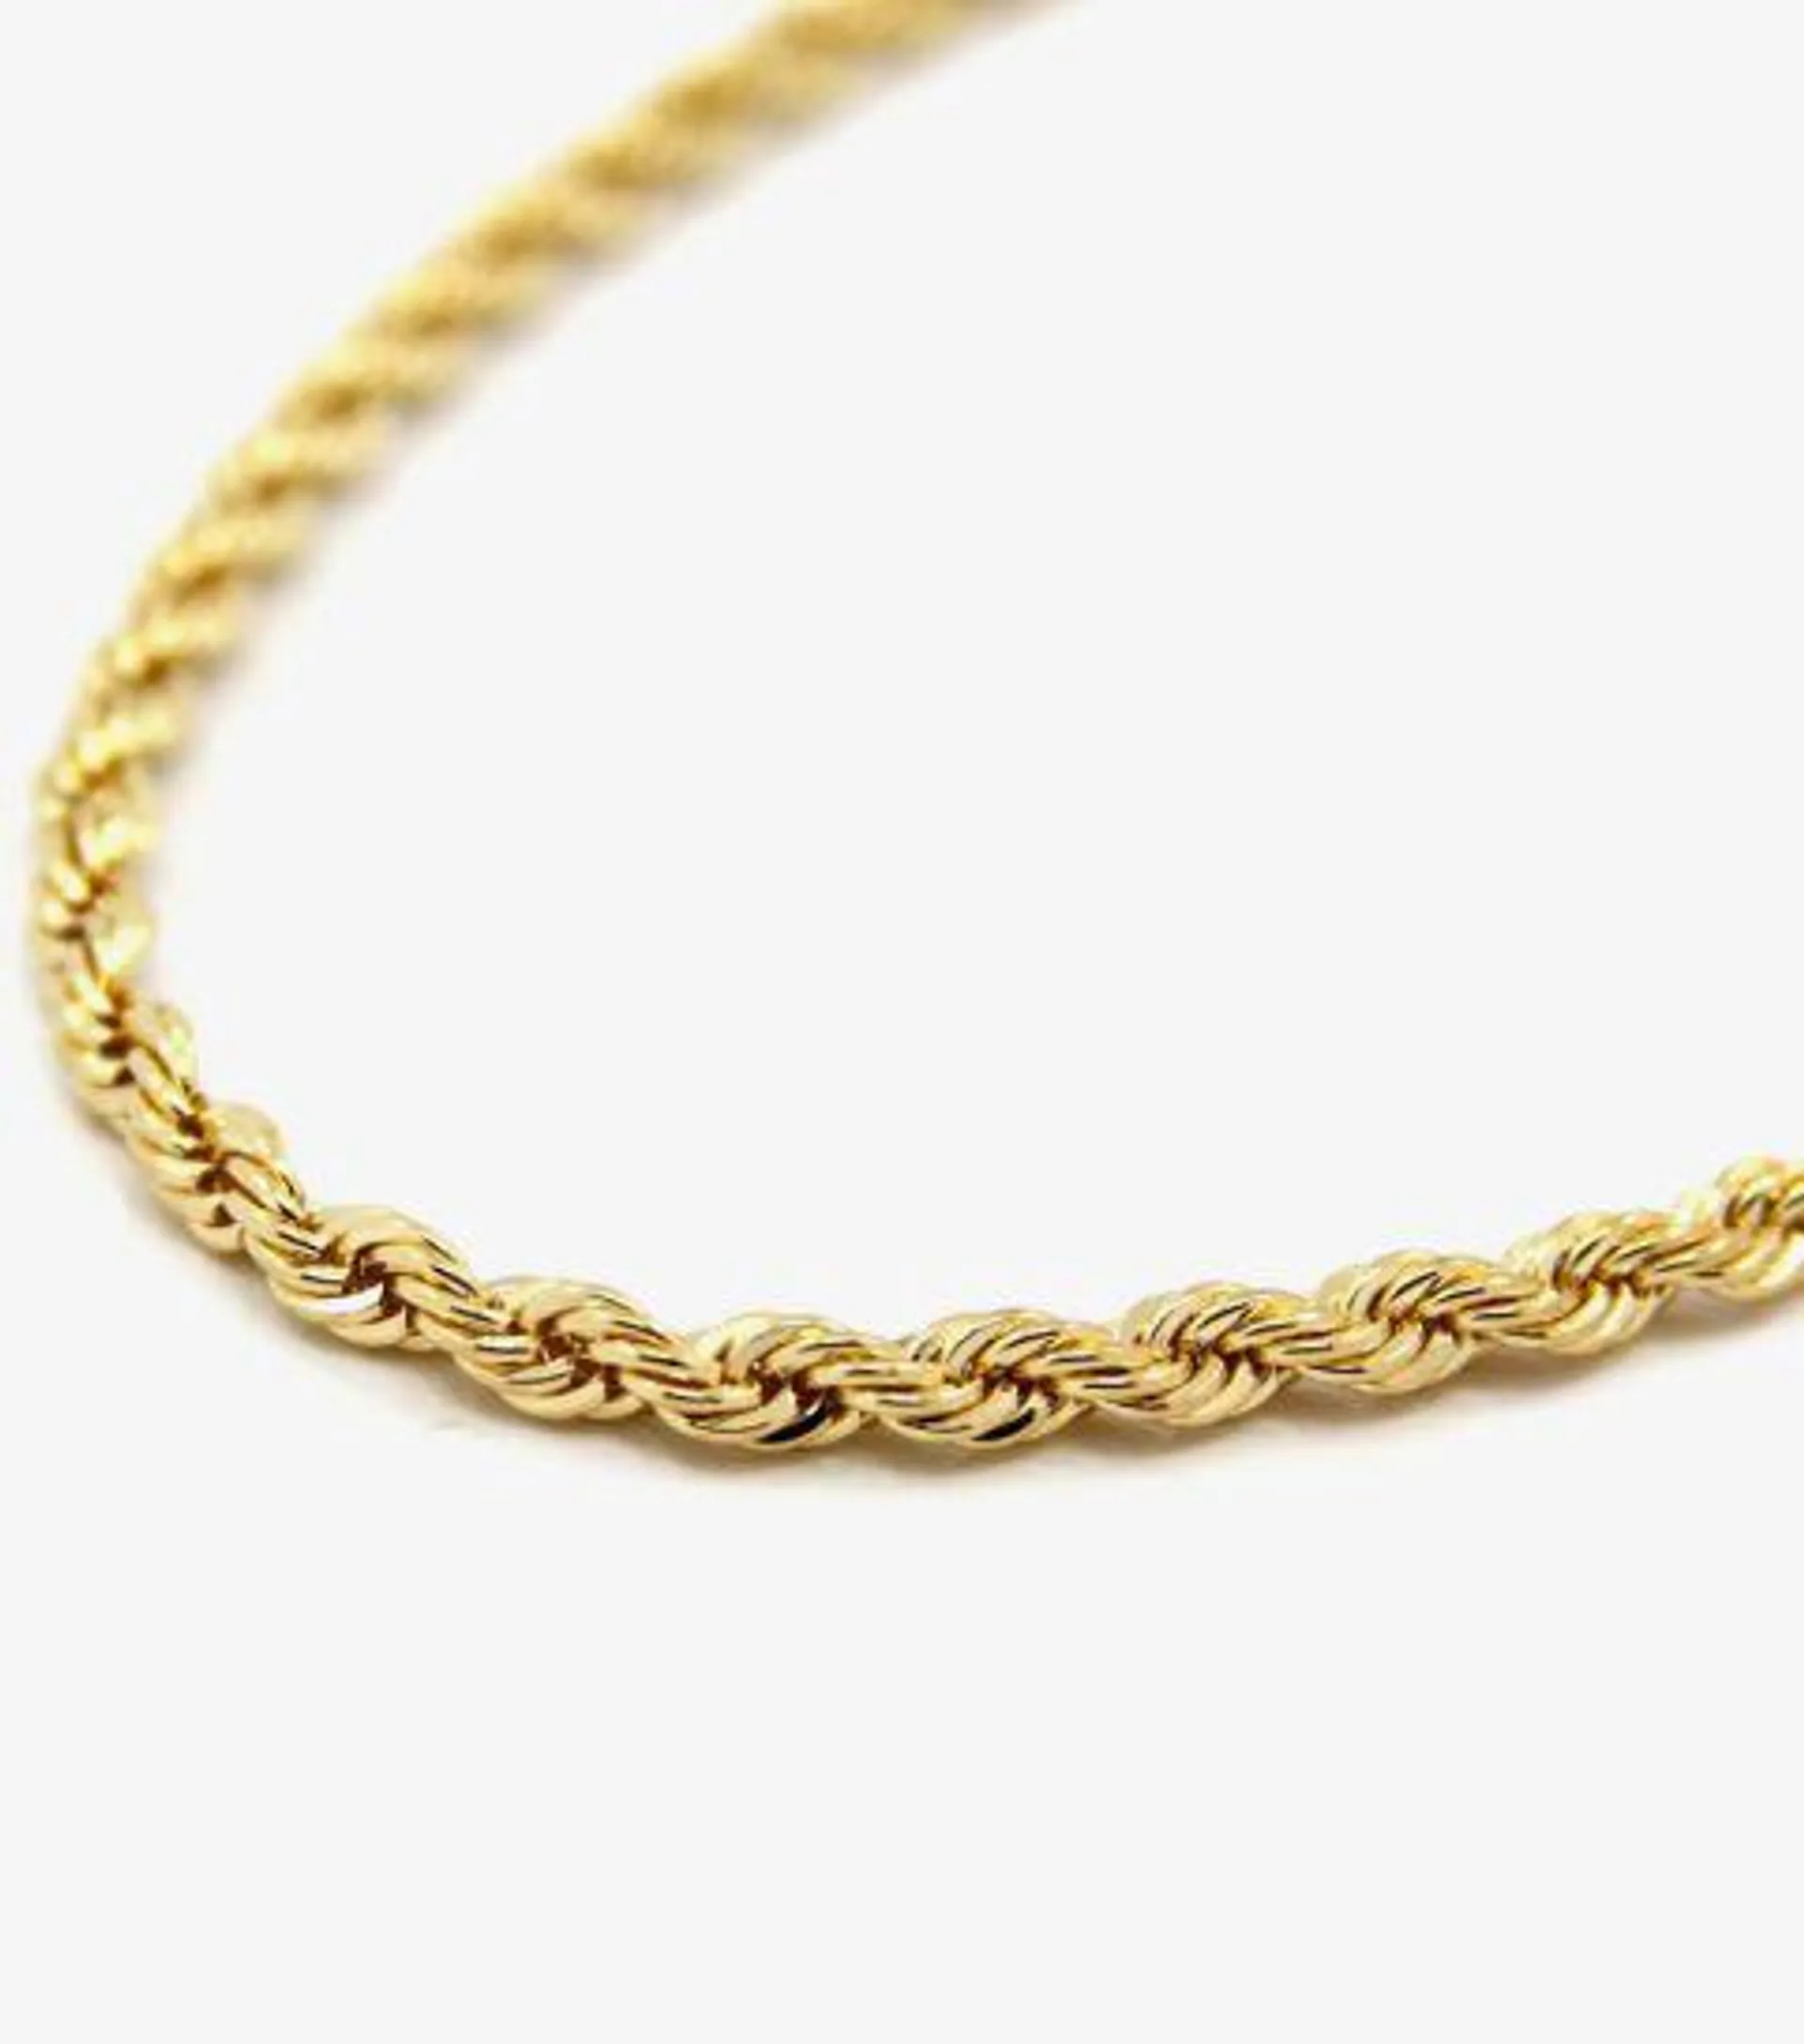 9ct Yellow Gold 18 Inch Rope Chain 1.12.0174